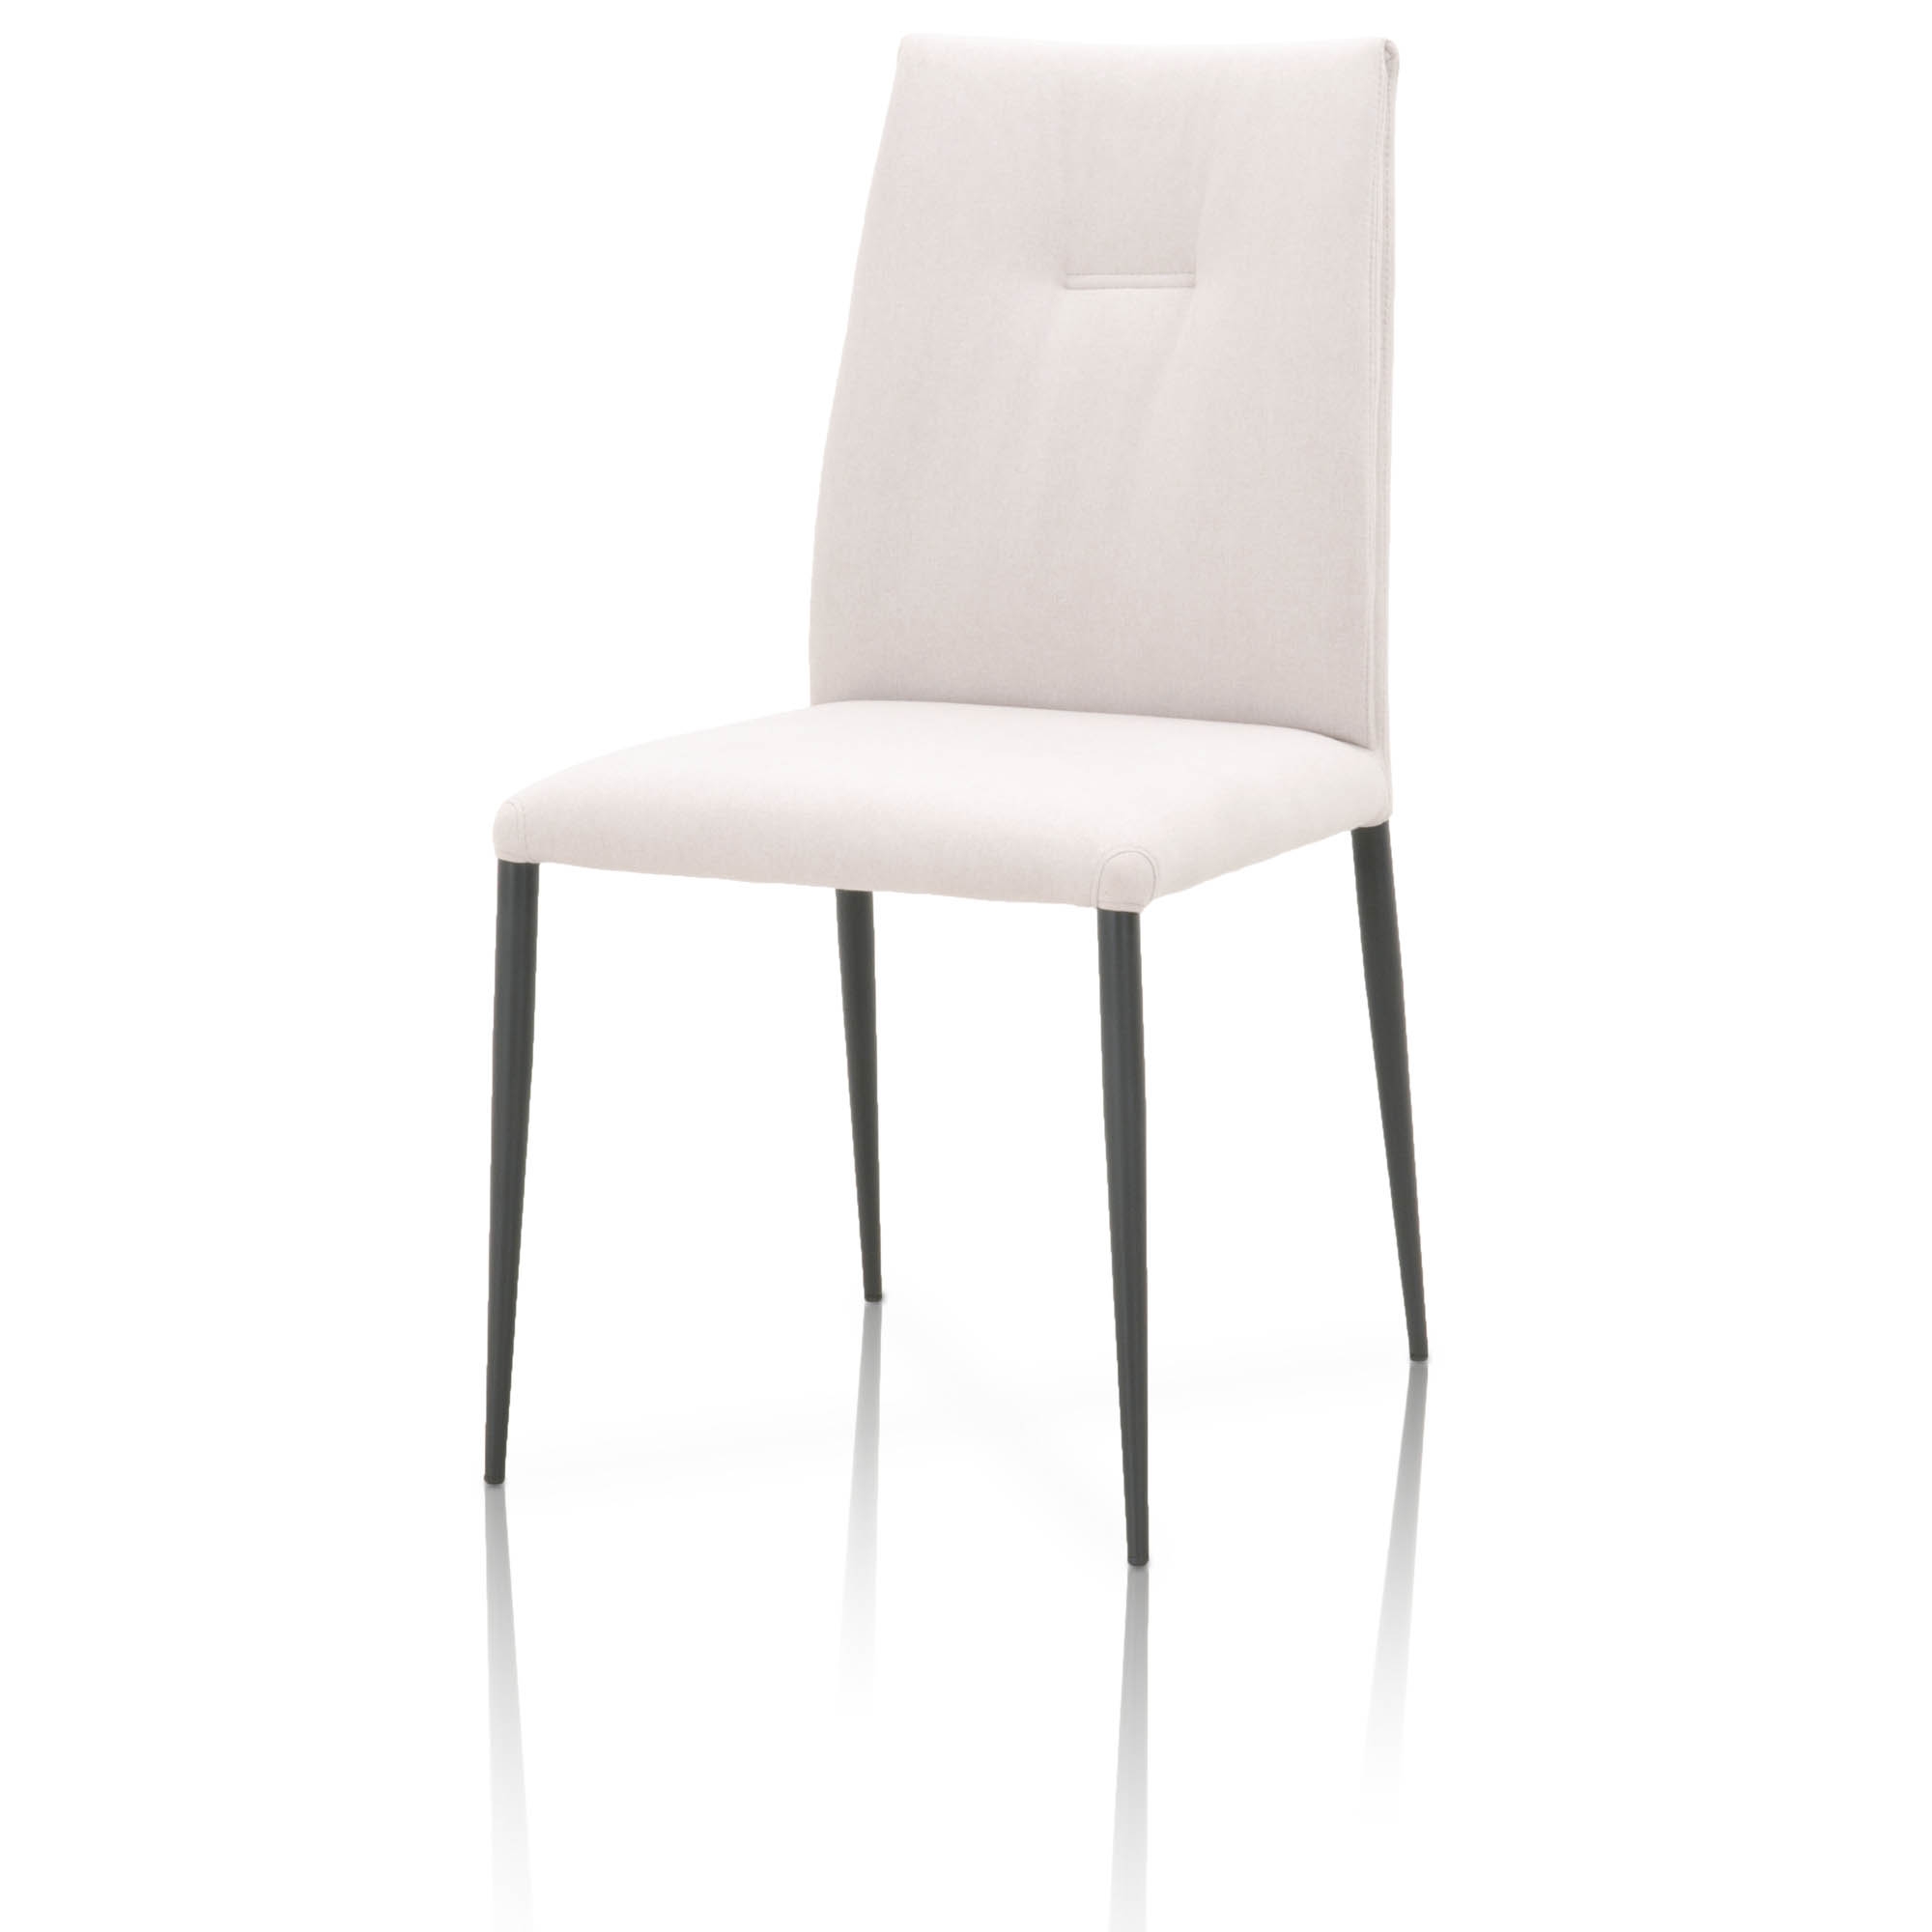 Drai Dining Chair, Clay & Gray, Set of 2 - Image 1